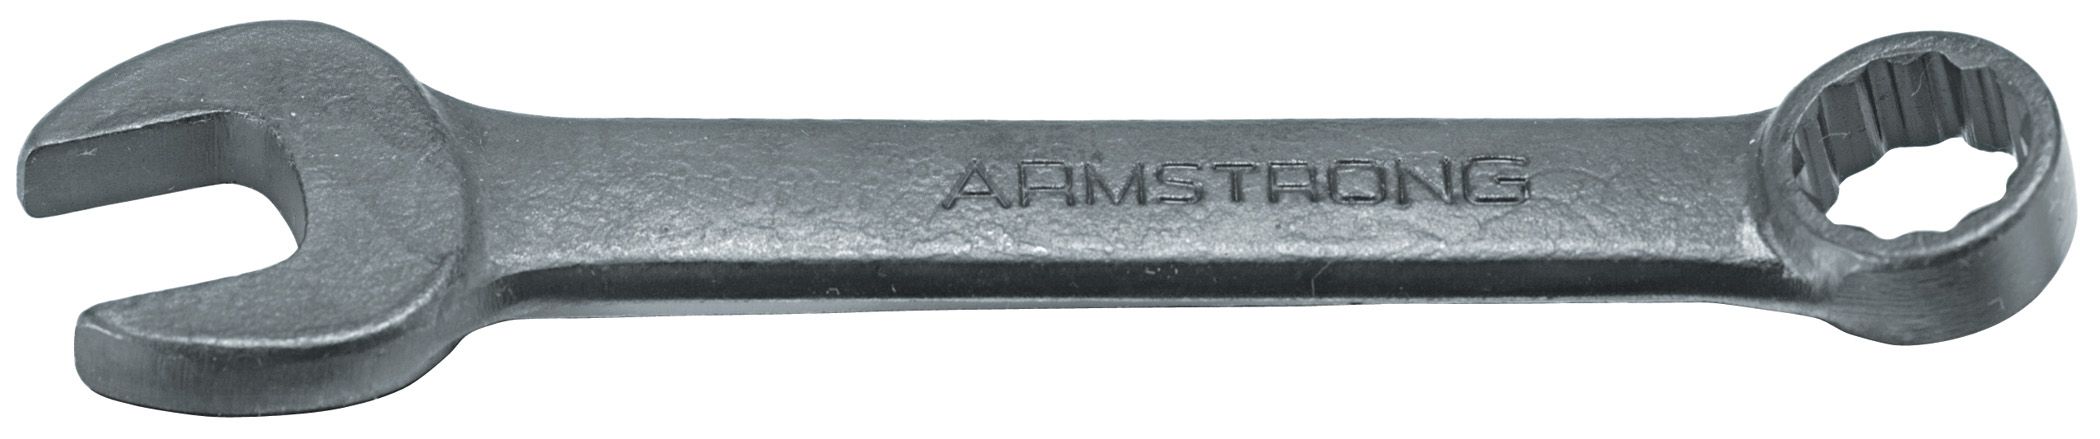 Armstrong 3/8 in. 12 pt. Black Oxide Short Combination Wrench